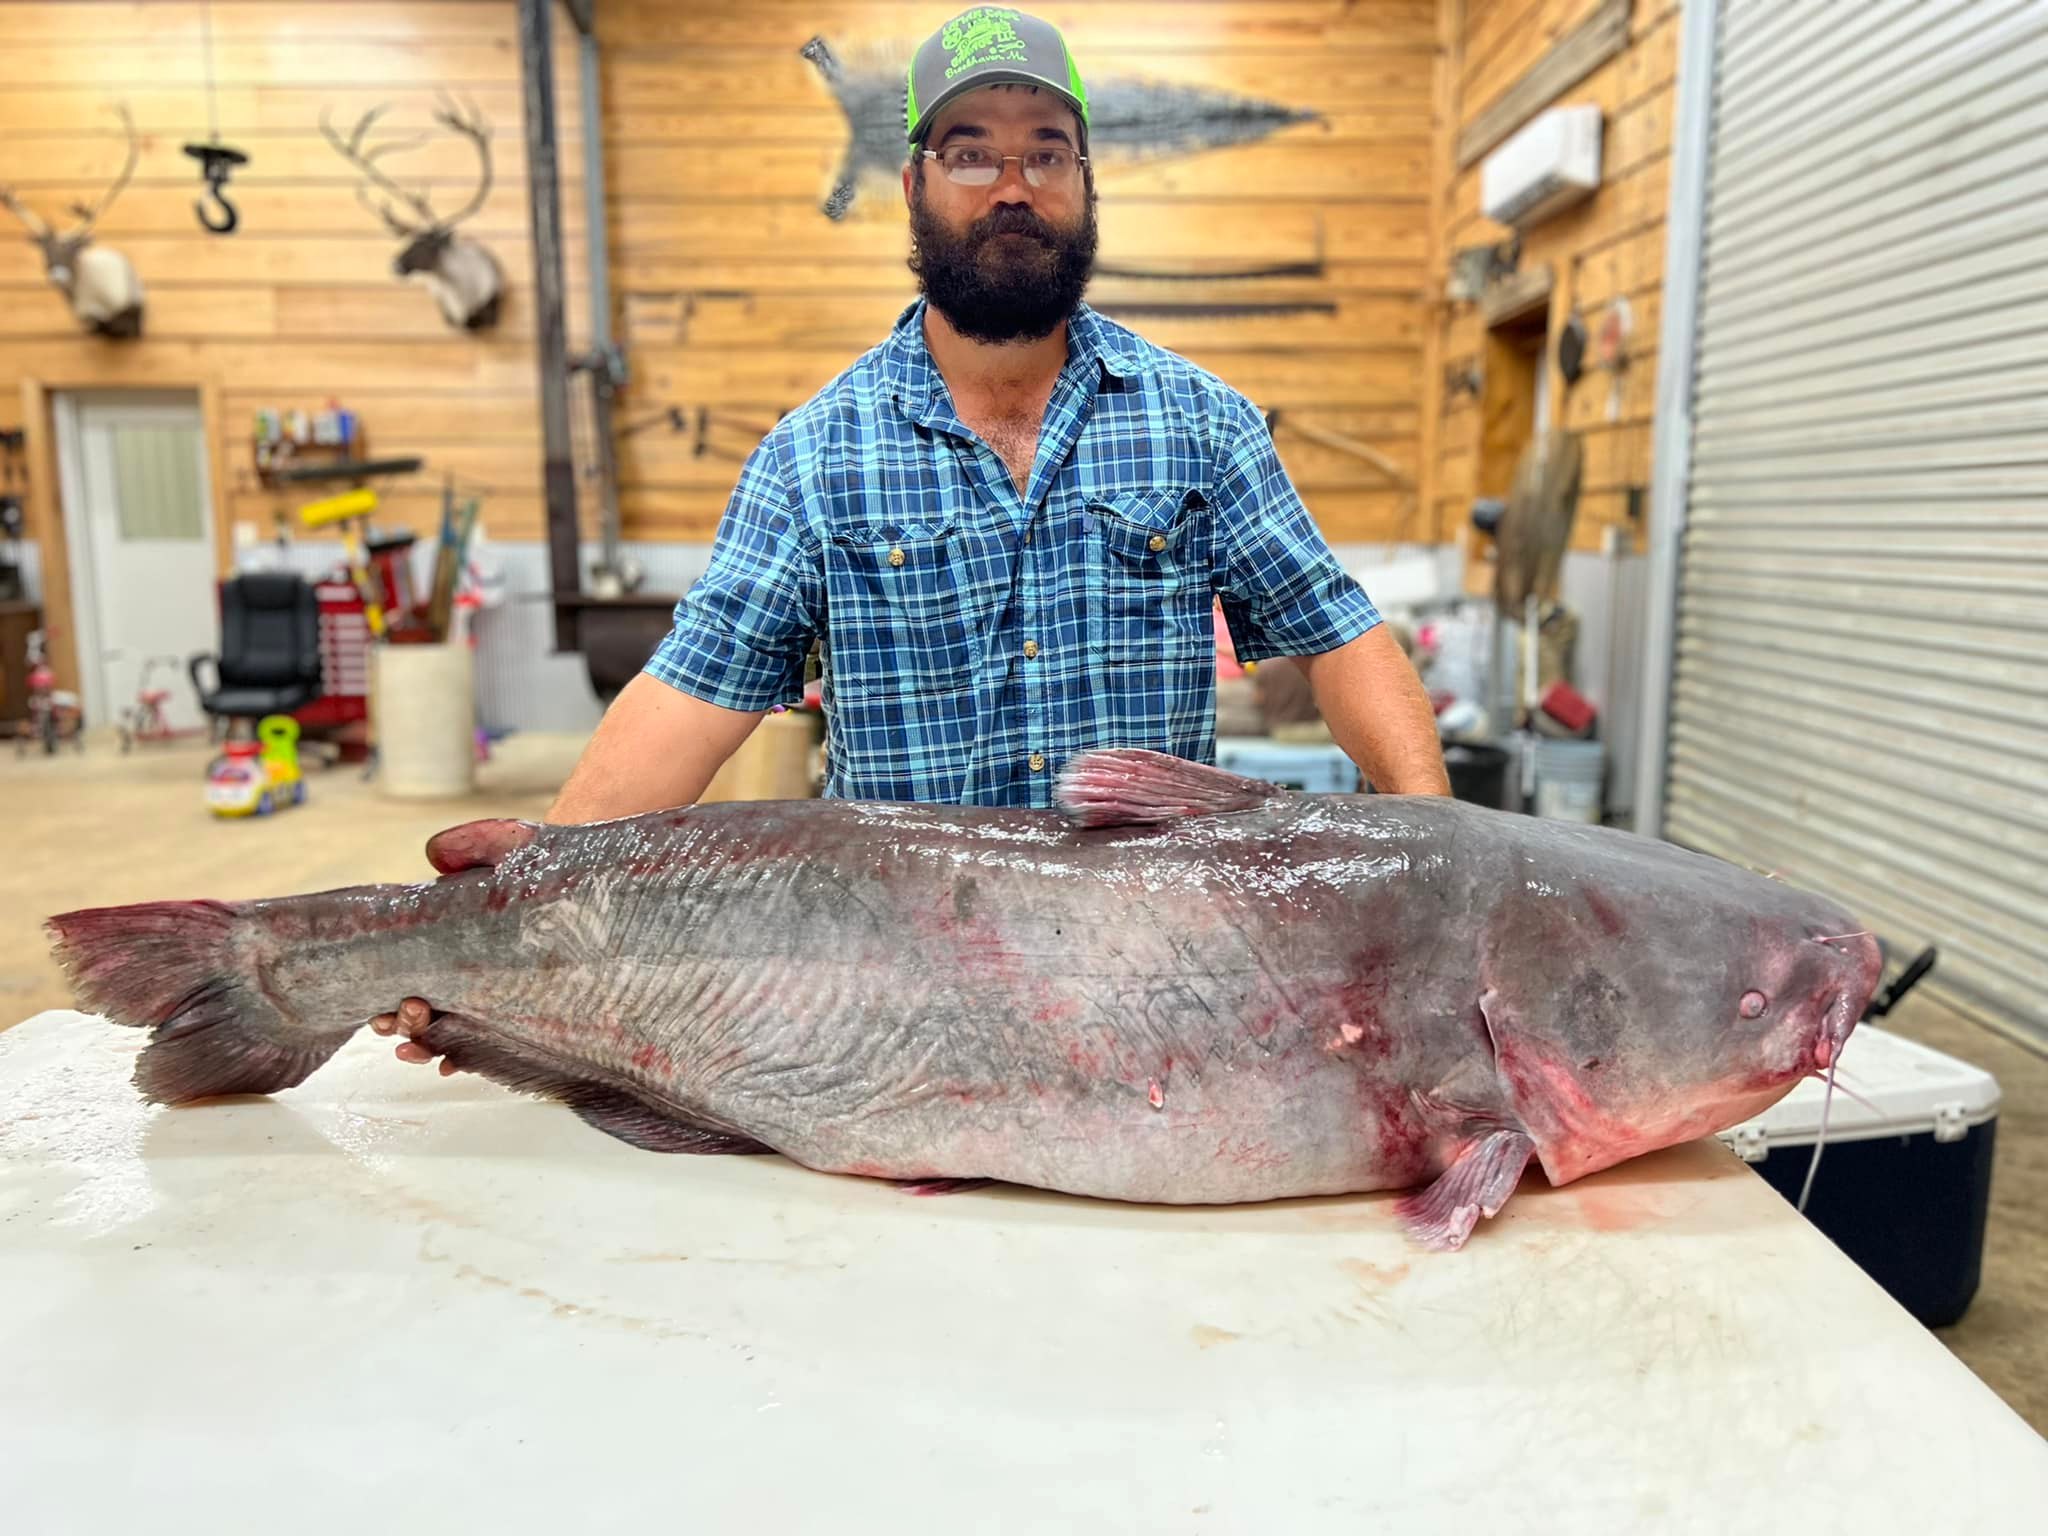 Mississippi Fisherman Catches Giant Blue Catfish with a Secret